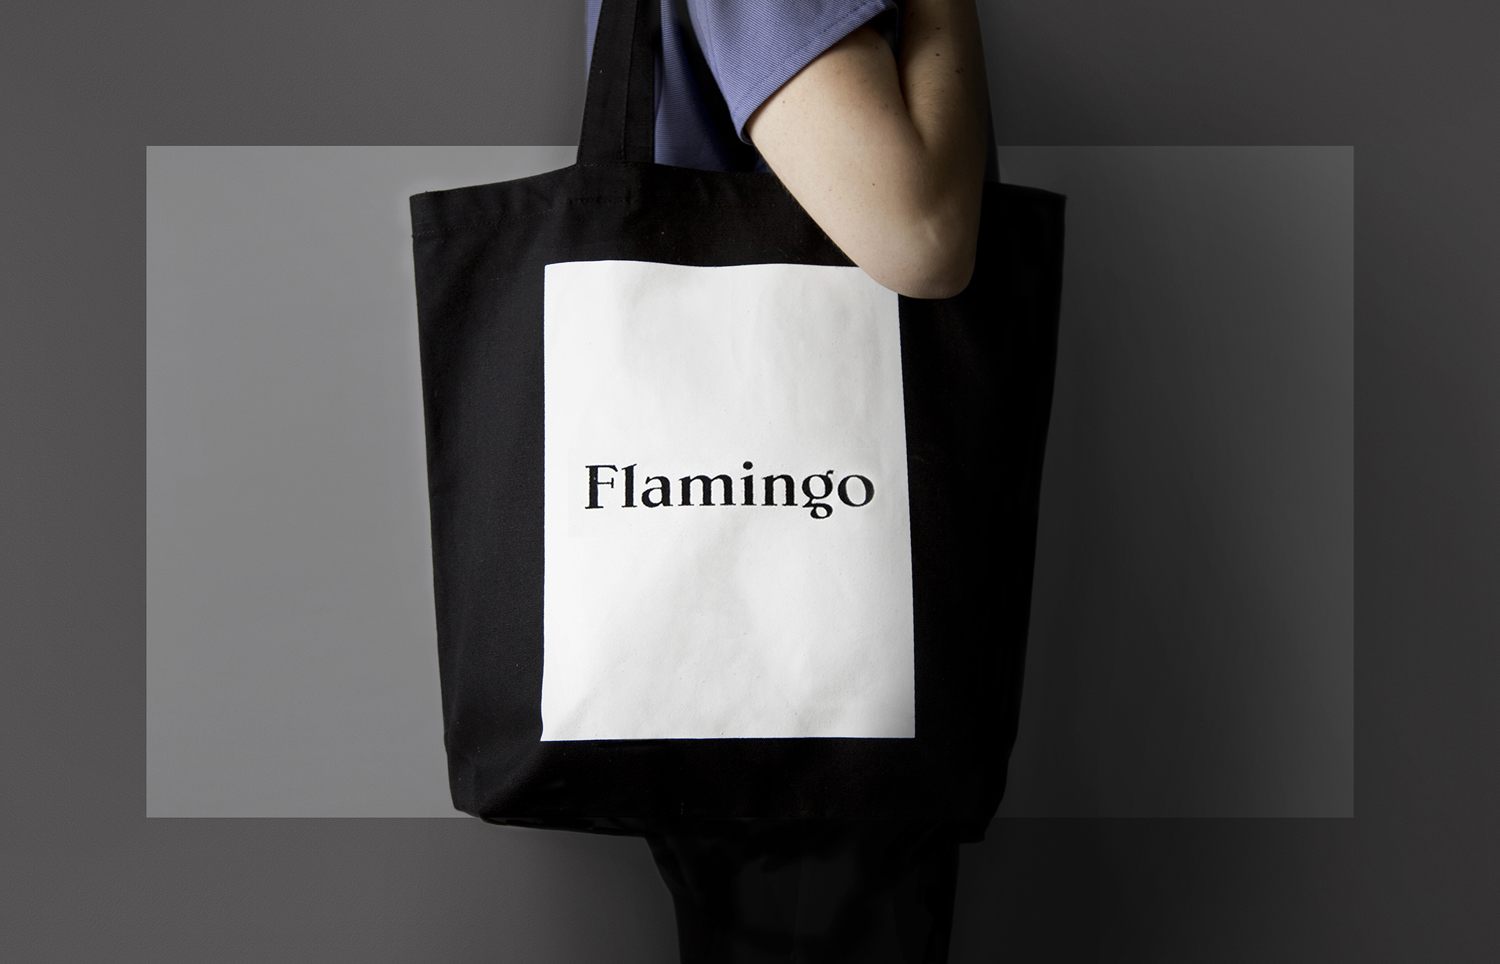 Brand Identity and screen printed tote bag for Flamingo by Bibliotheque, United Kingdom